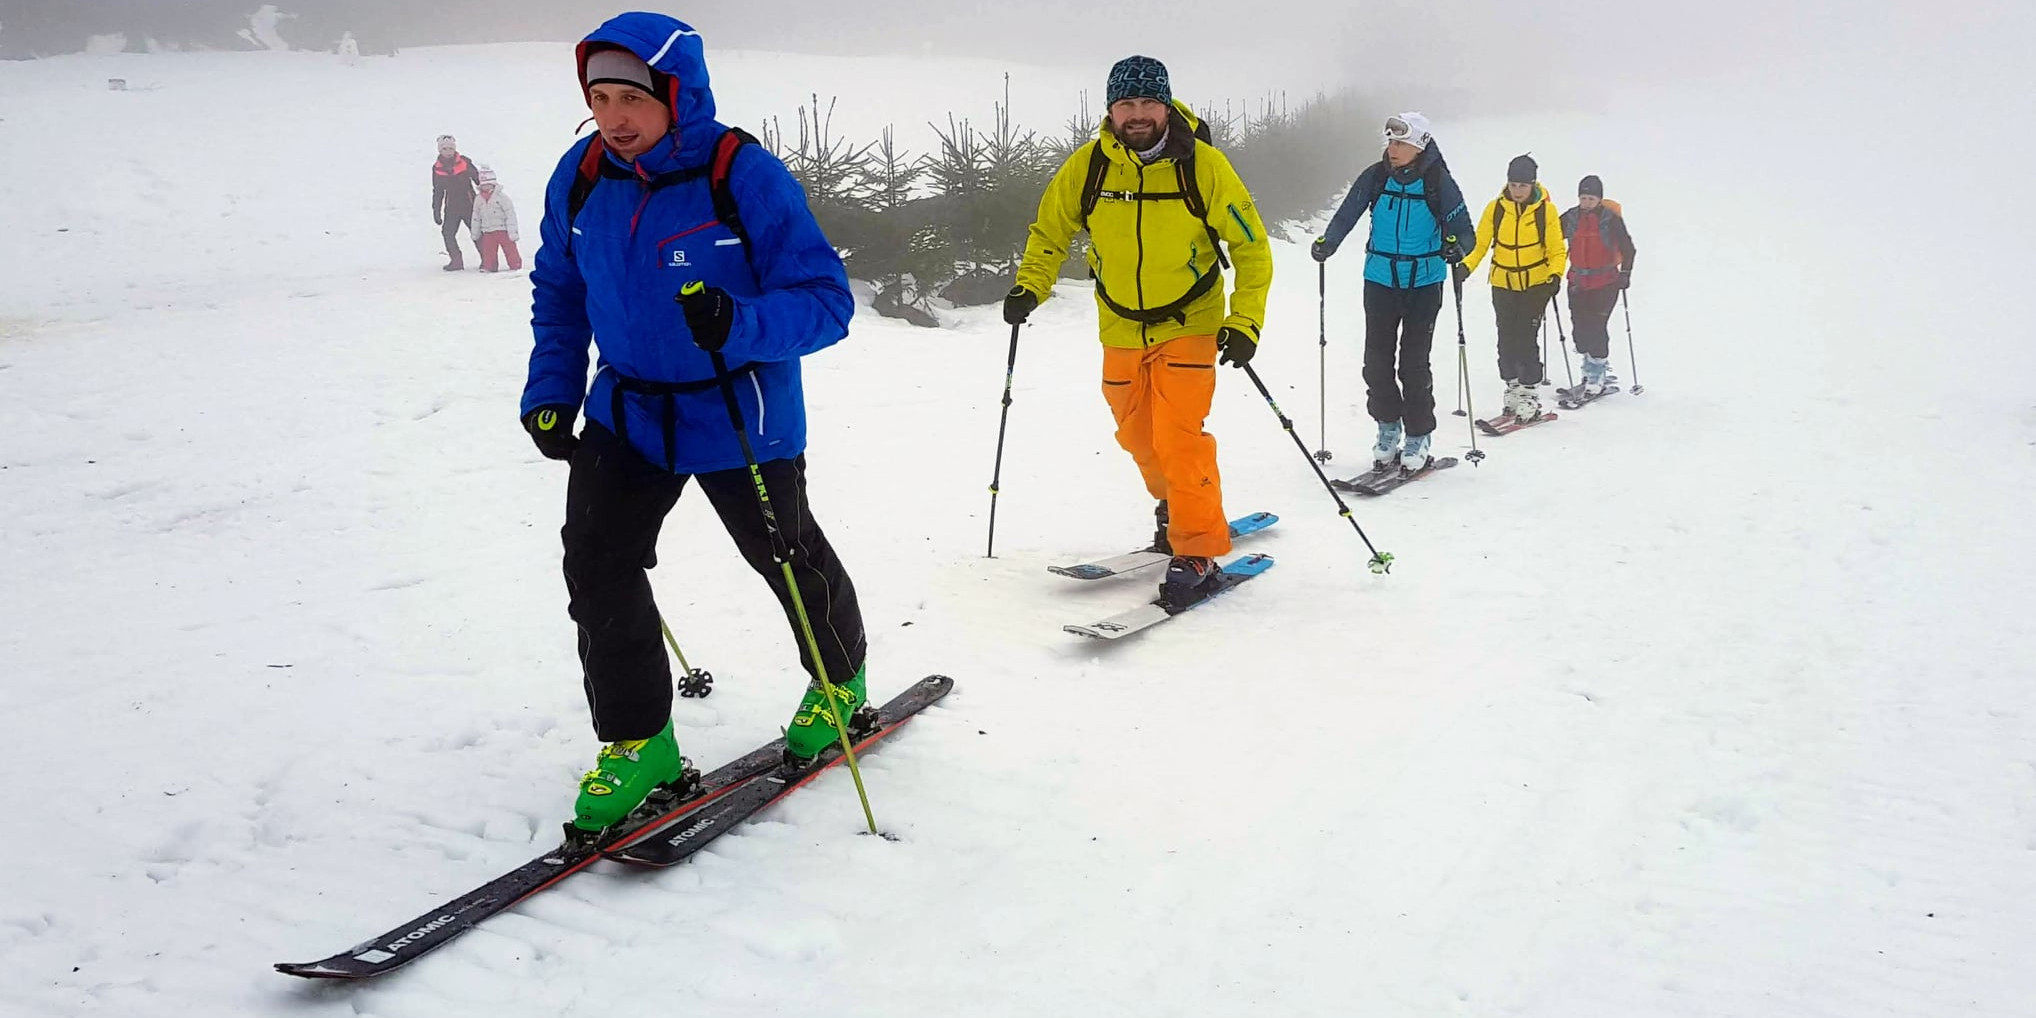 Ski mountaineering gives a huge sense of freedom, say those who have tried it